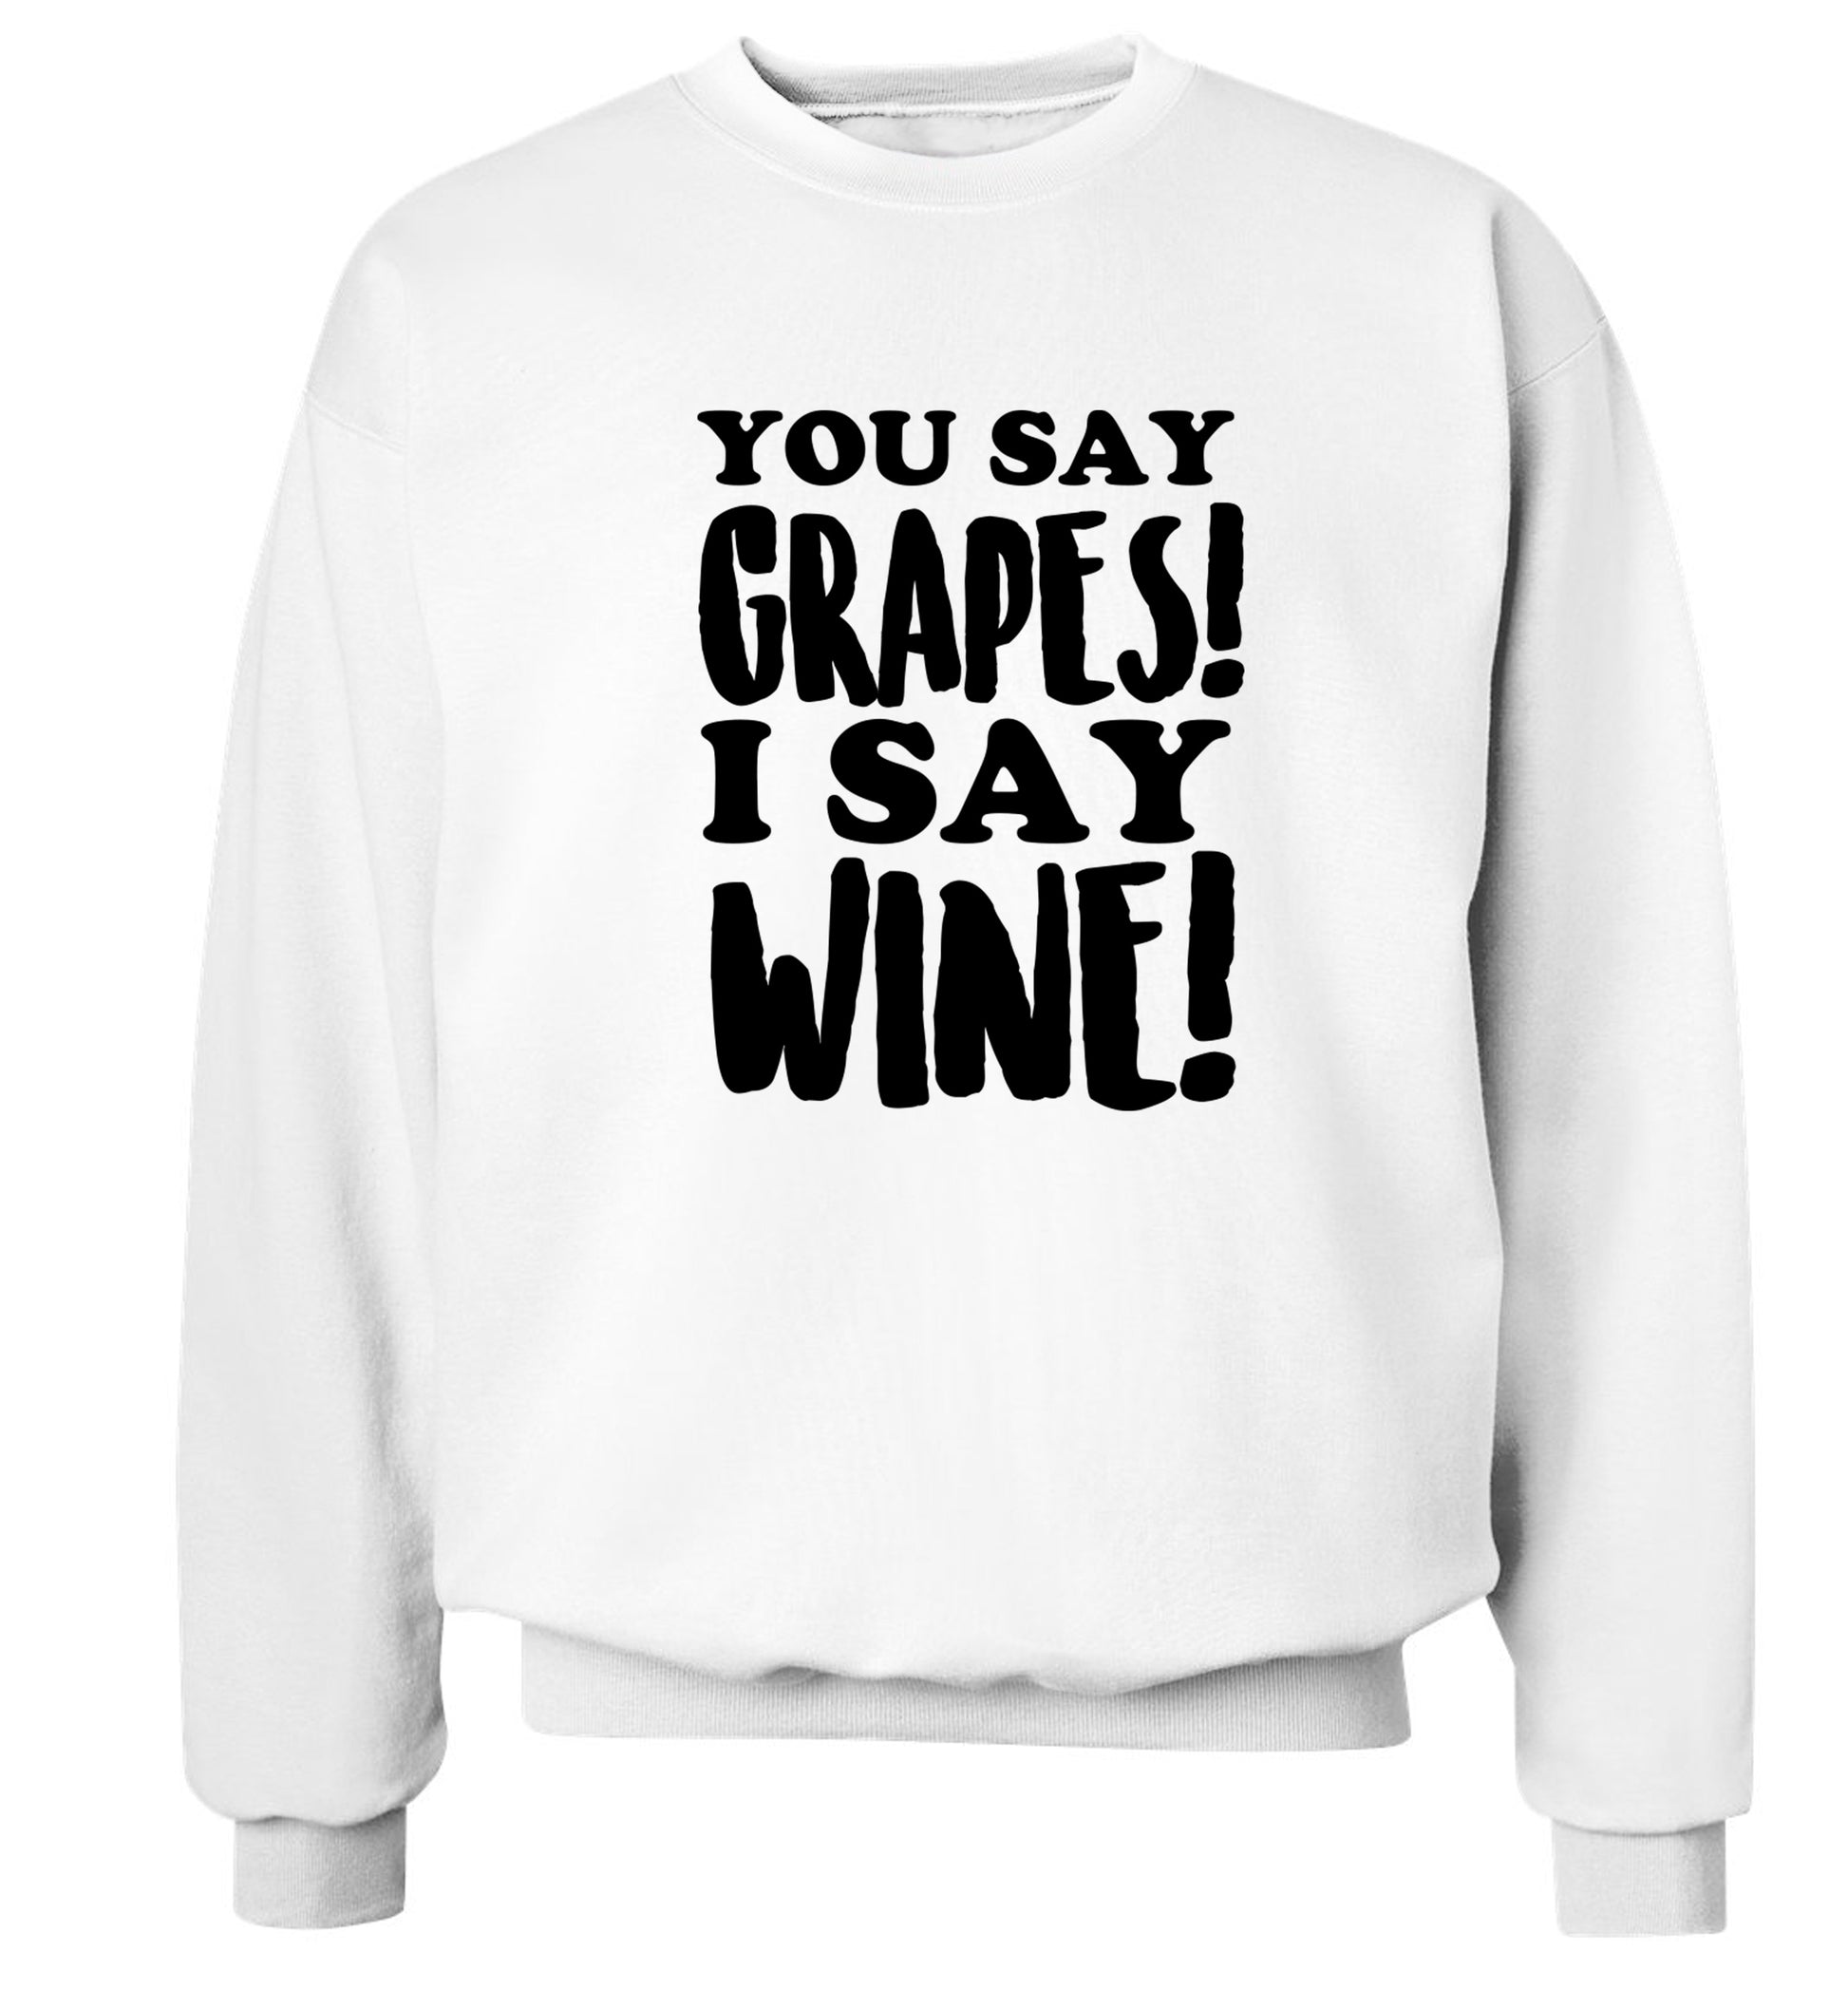 You say grapes I say wine! Adult's unisex white Sweater 2XL